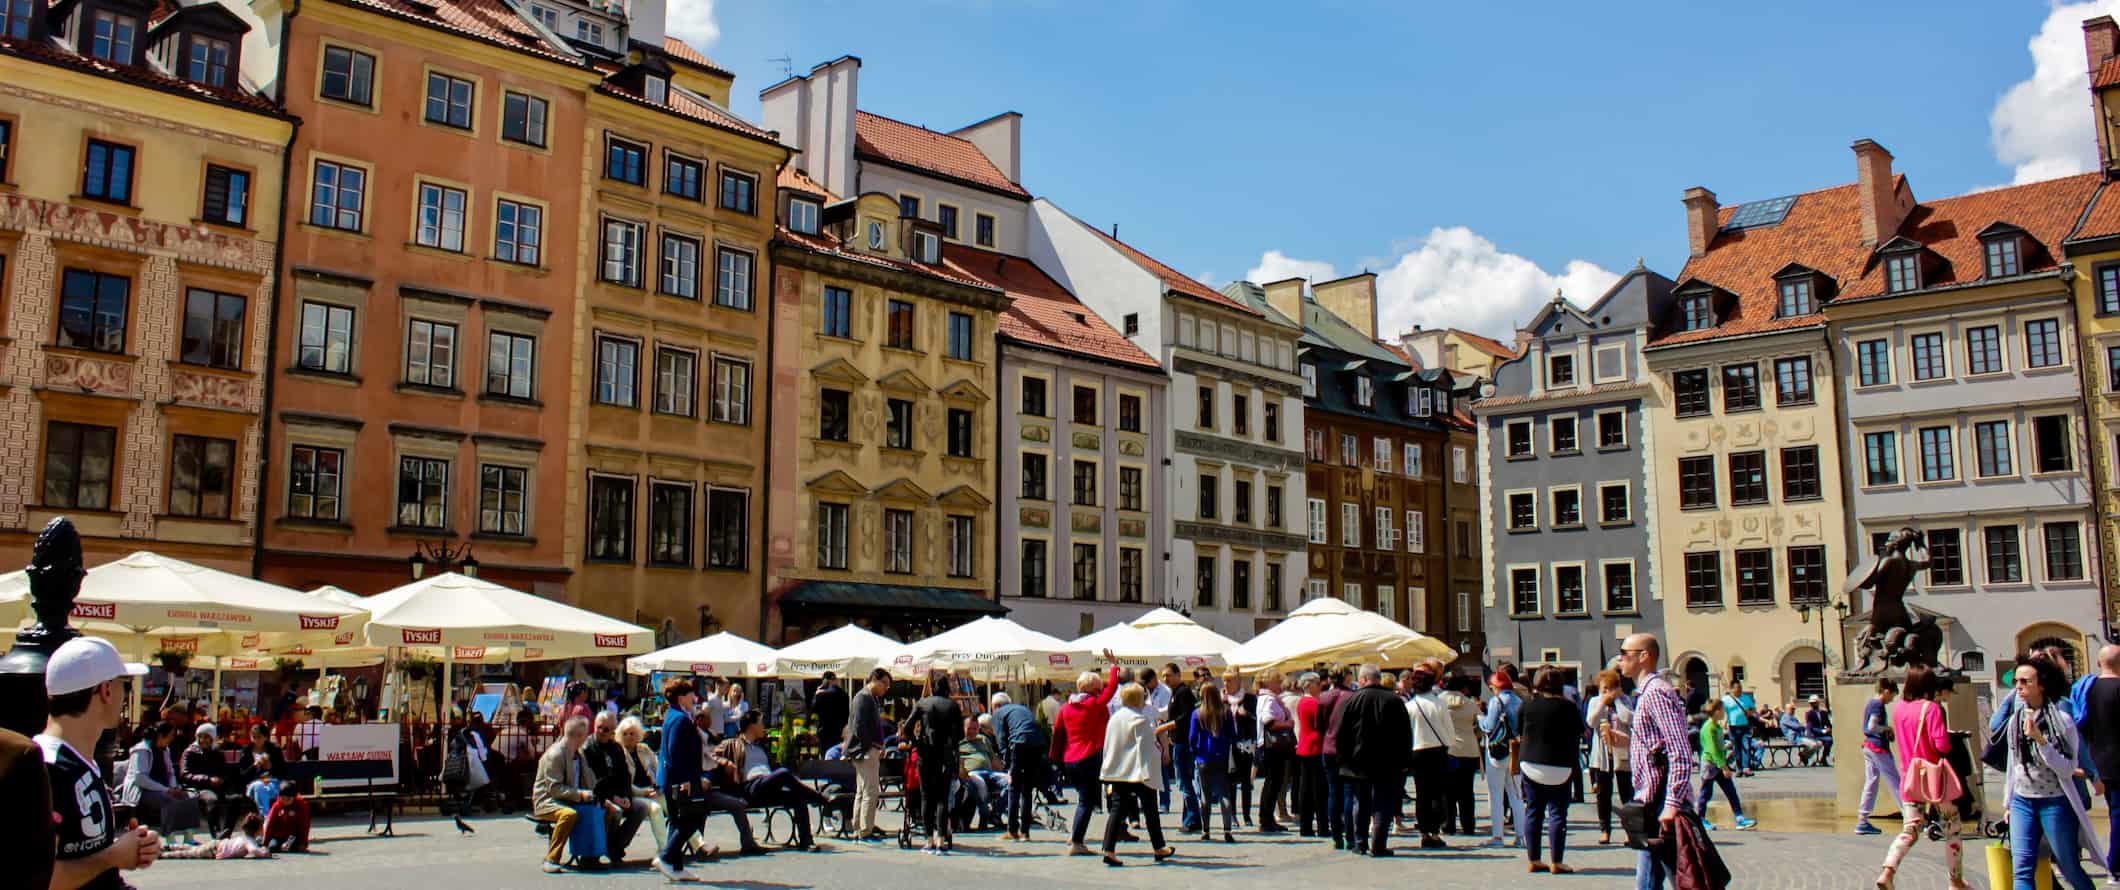 People wandering around the Old Town of Warsaw, Poland